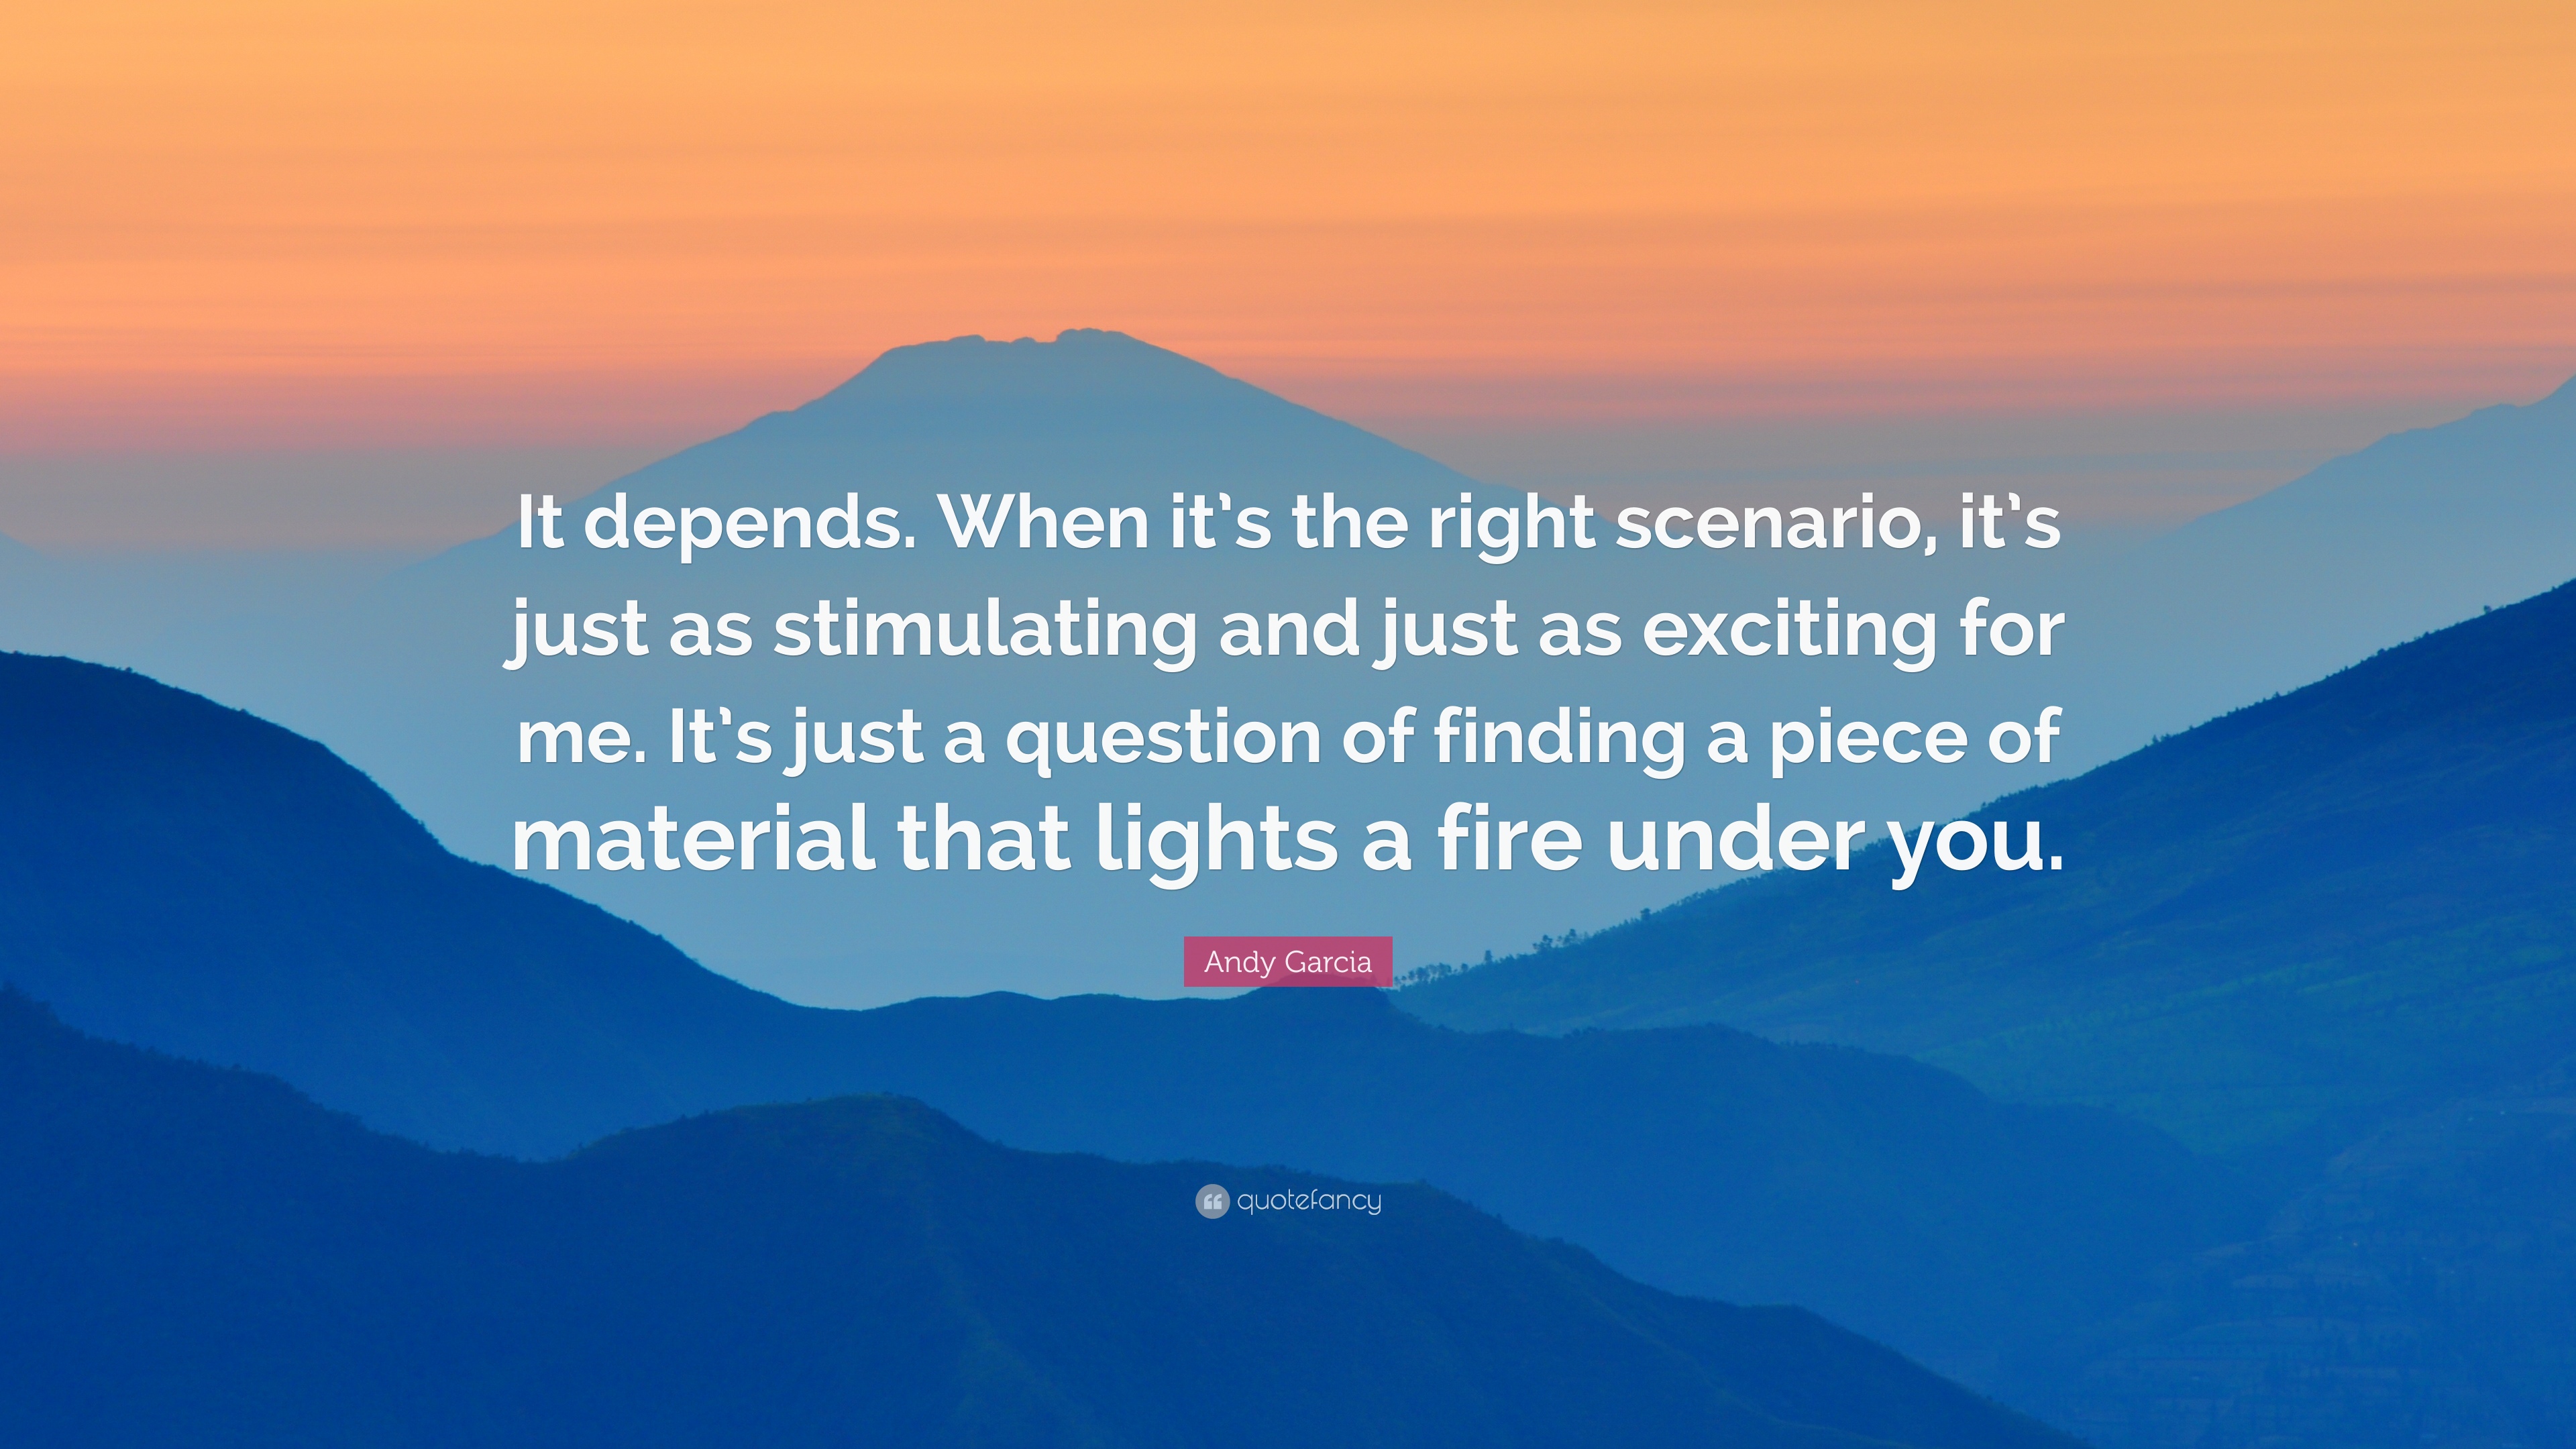 Andy Garcia Quote: “It depends. When it's the right scenario, it's